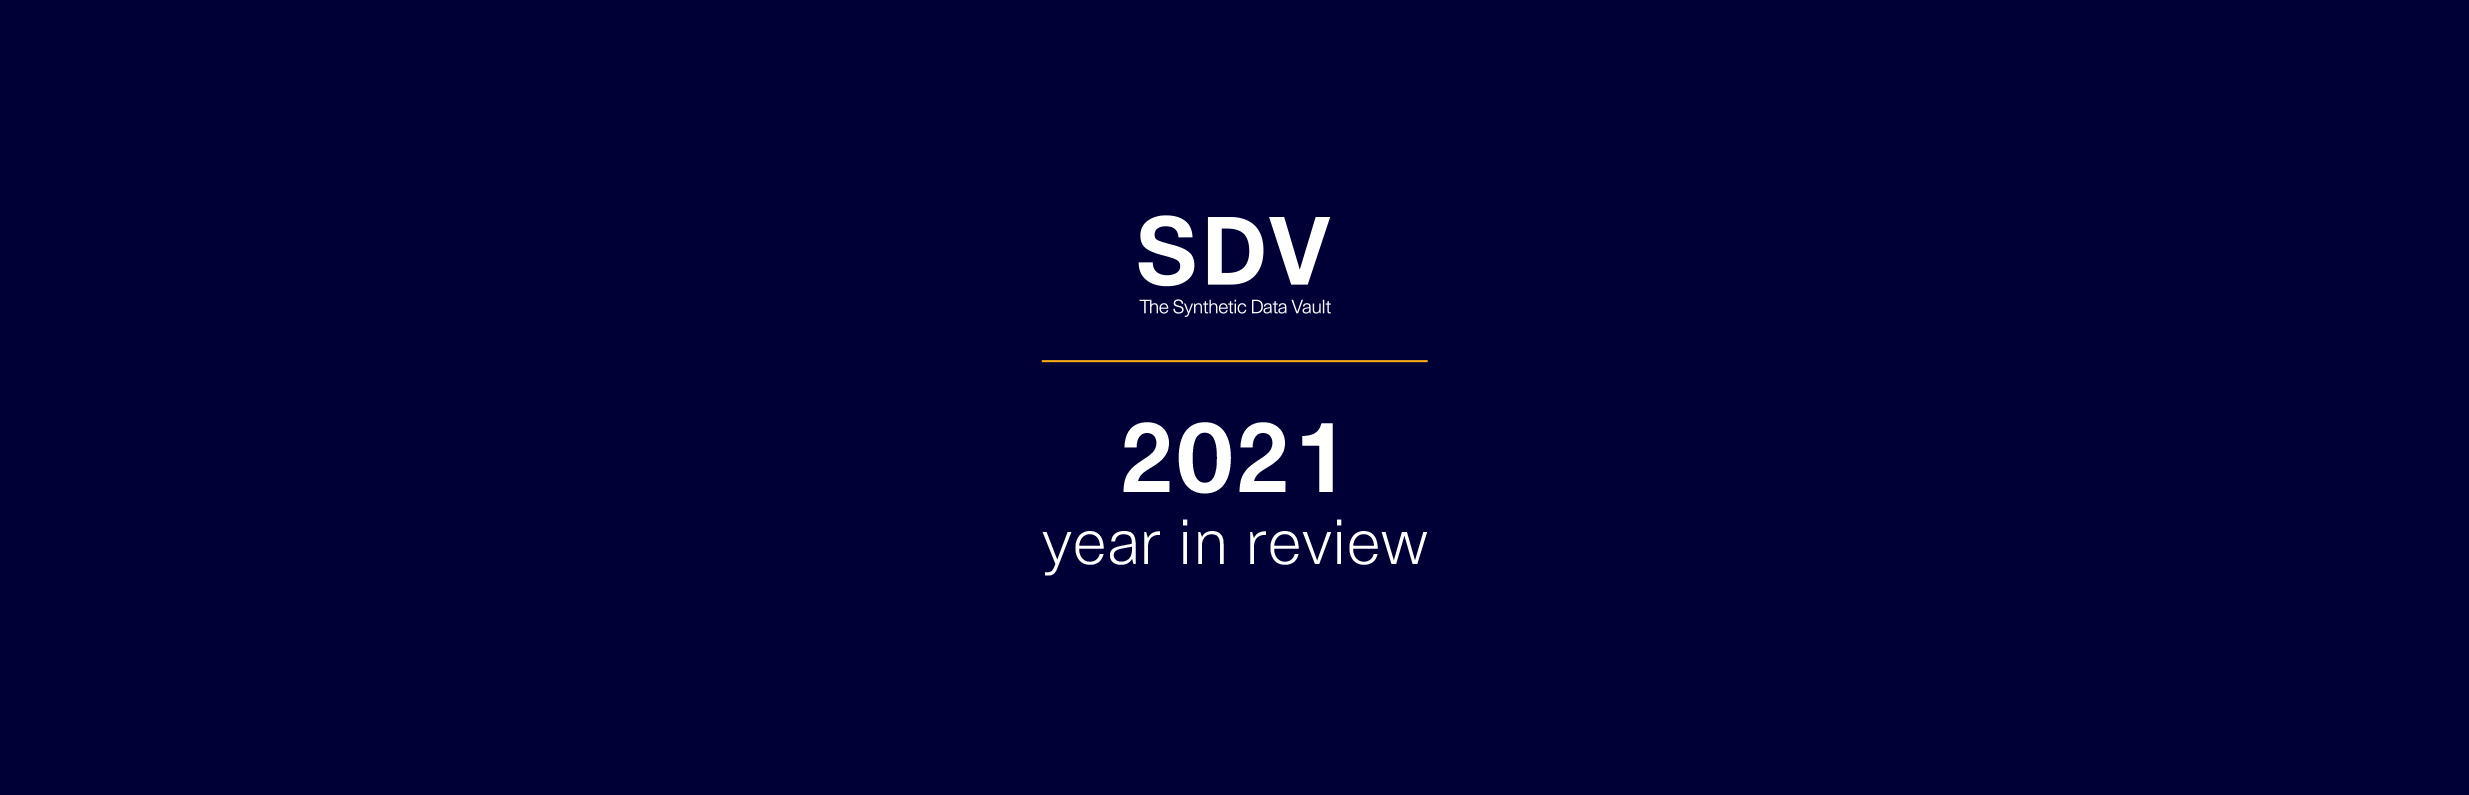 The SDV in 2021: A year in review